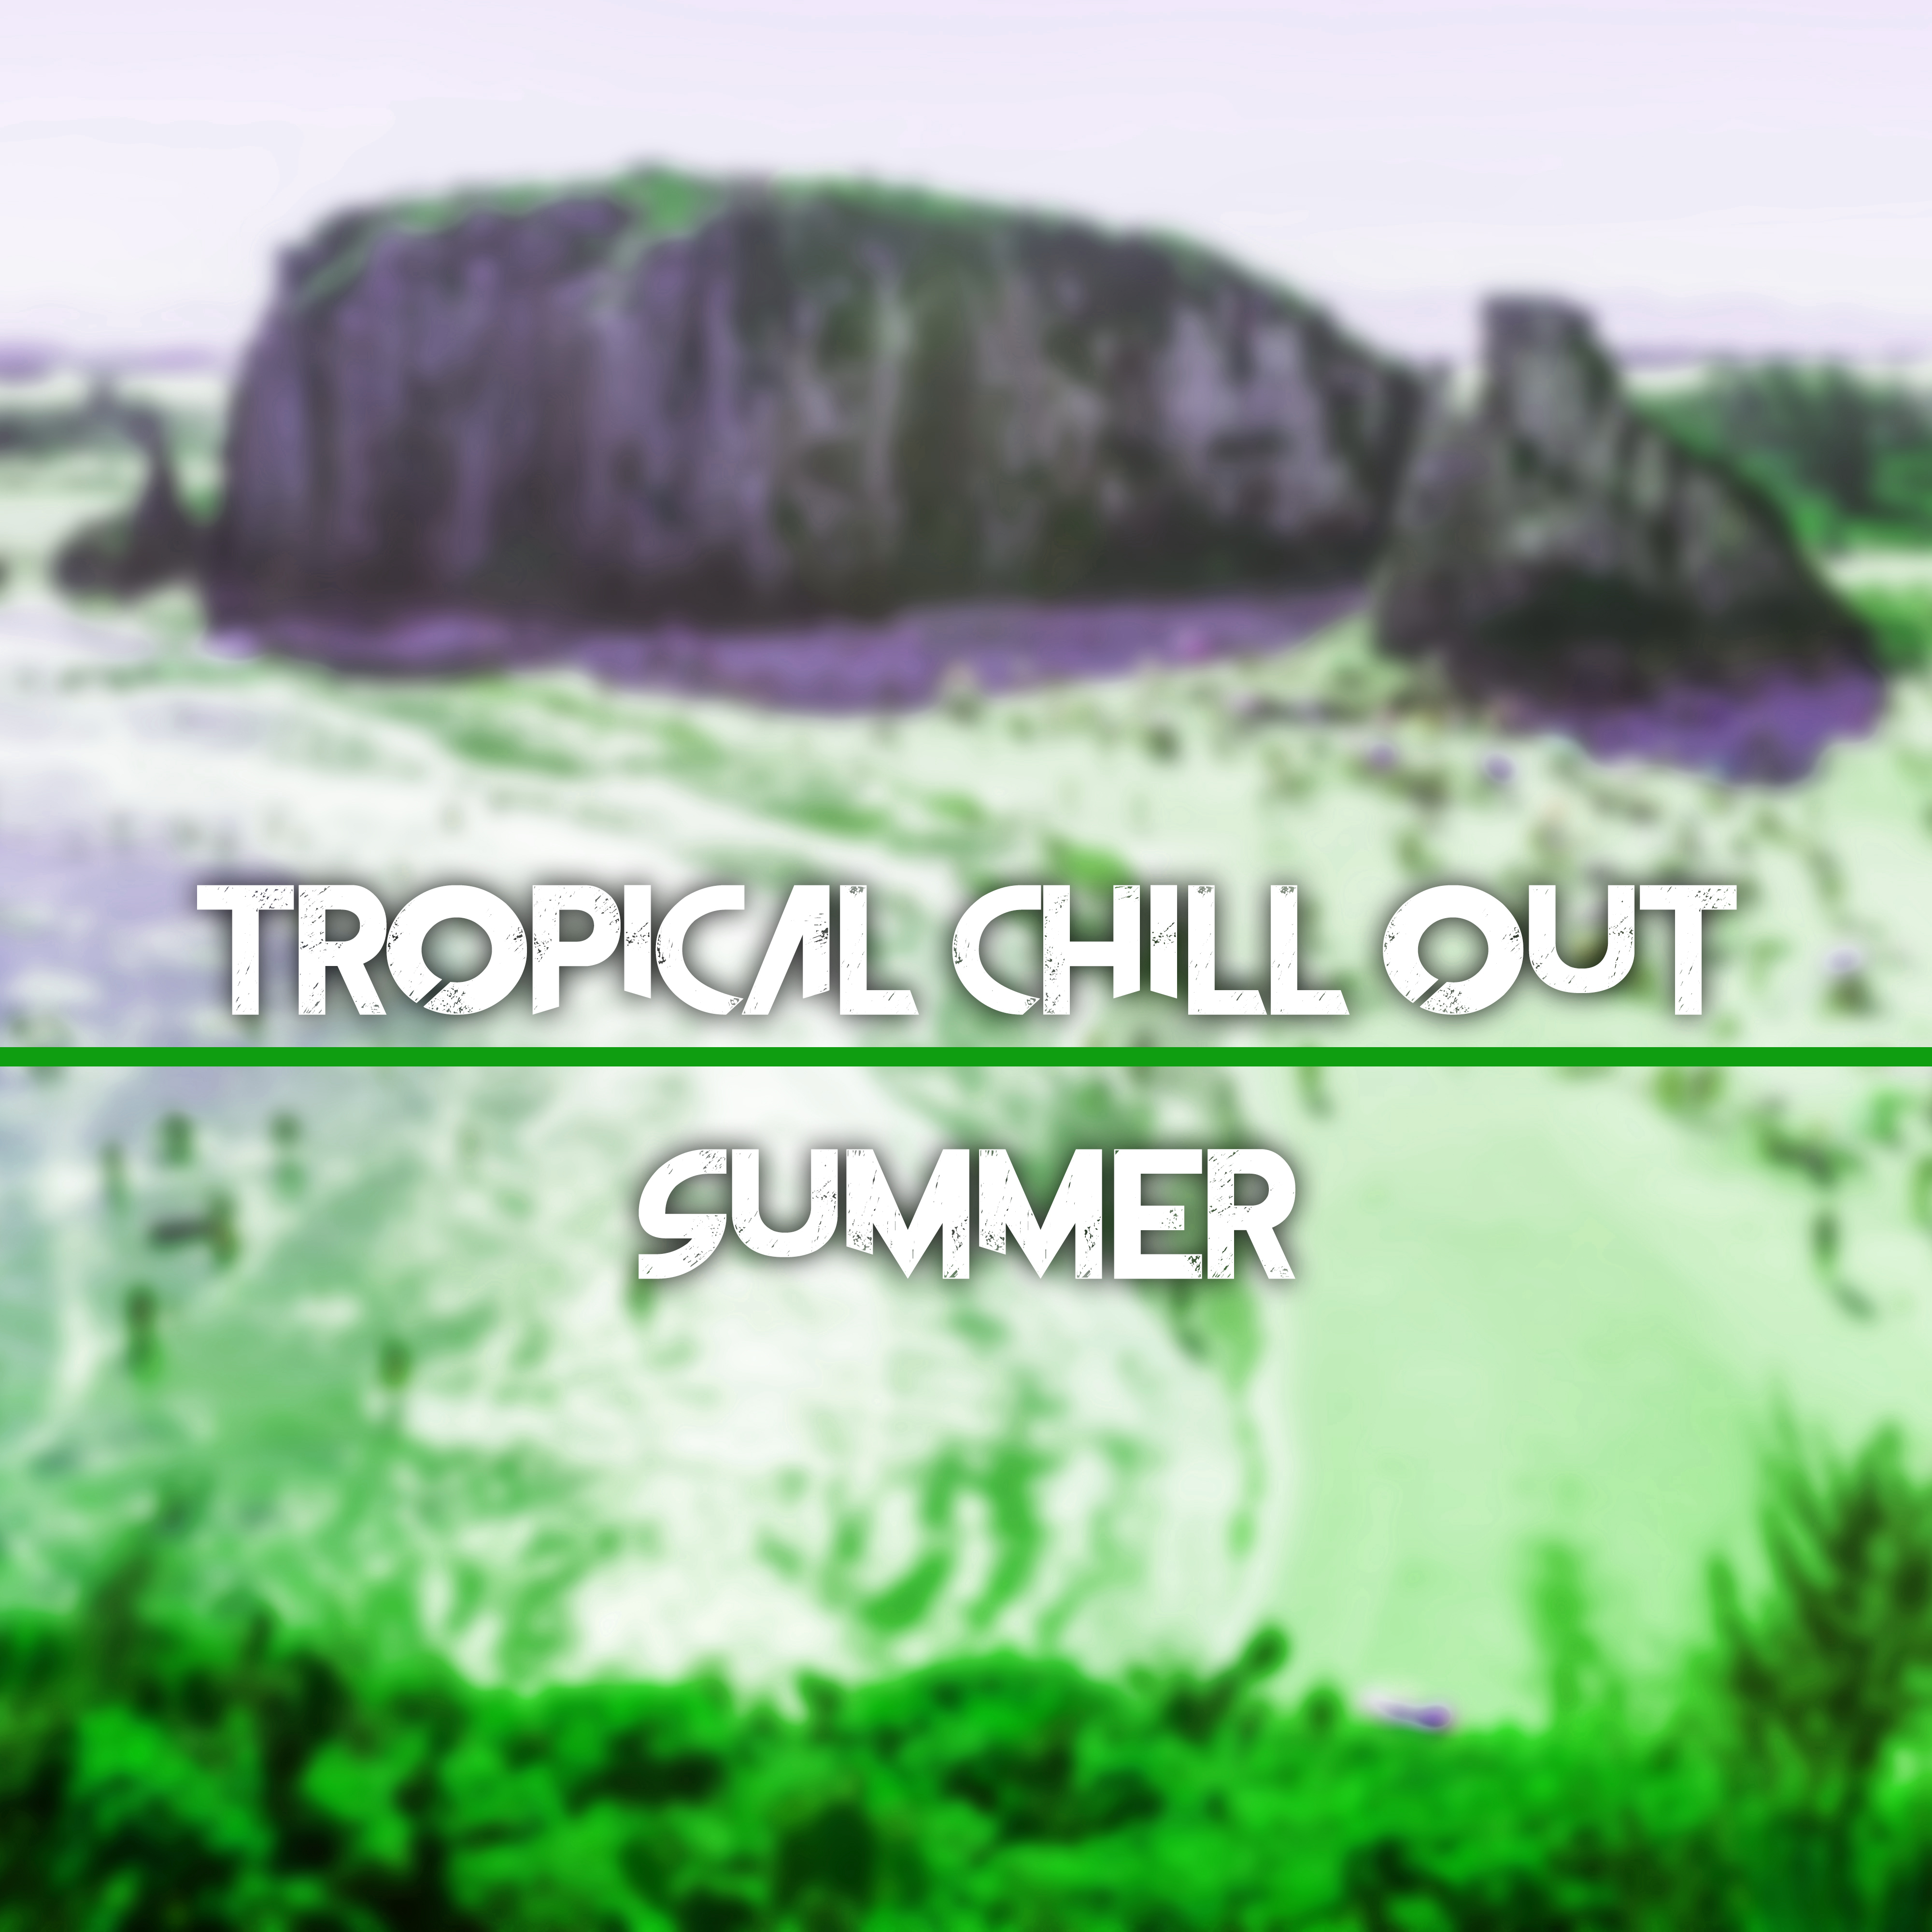 Tropical Chill Out Summer  Sunny Day, Summer Vibes, Holiday Relaxation, Stress Relief